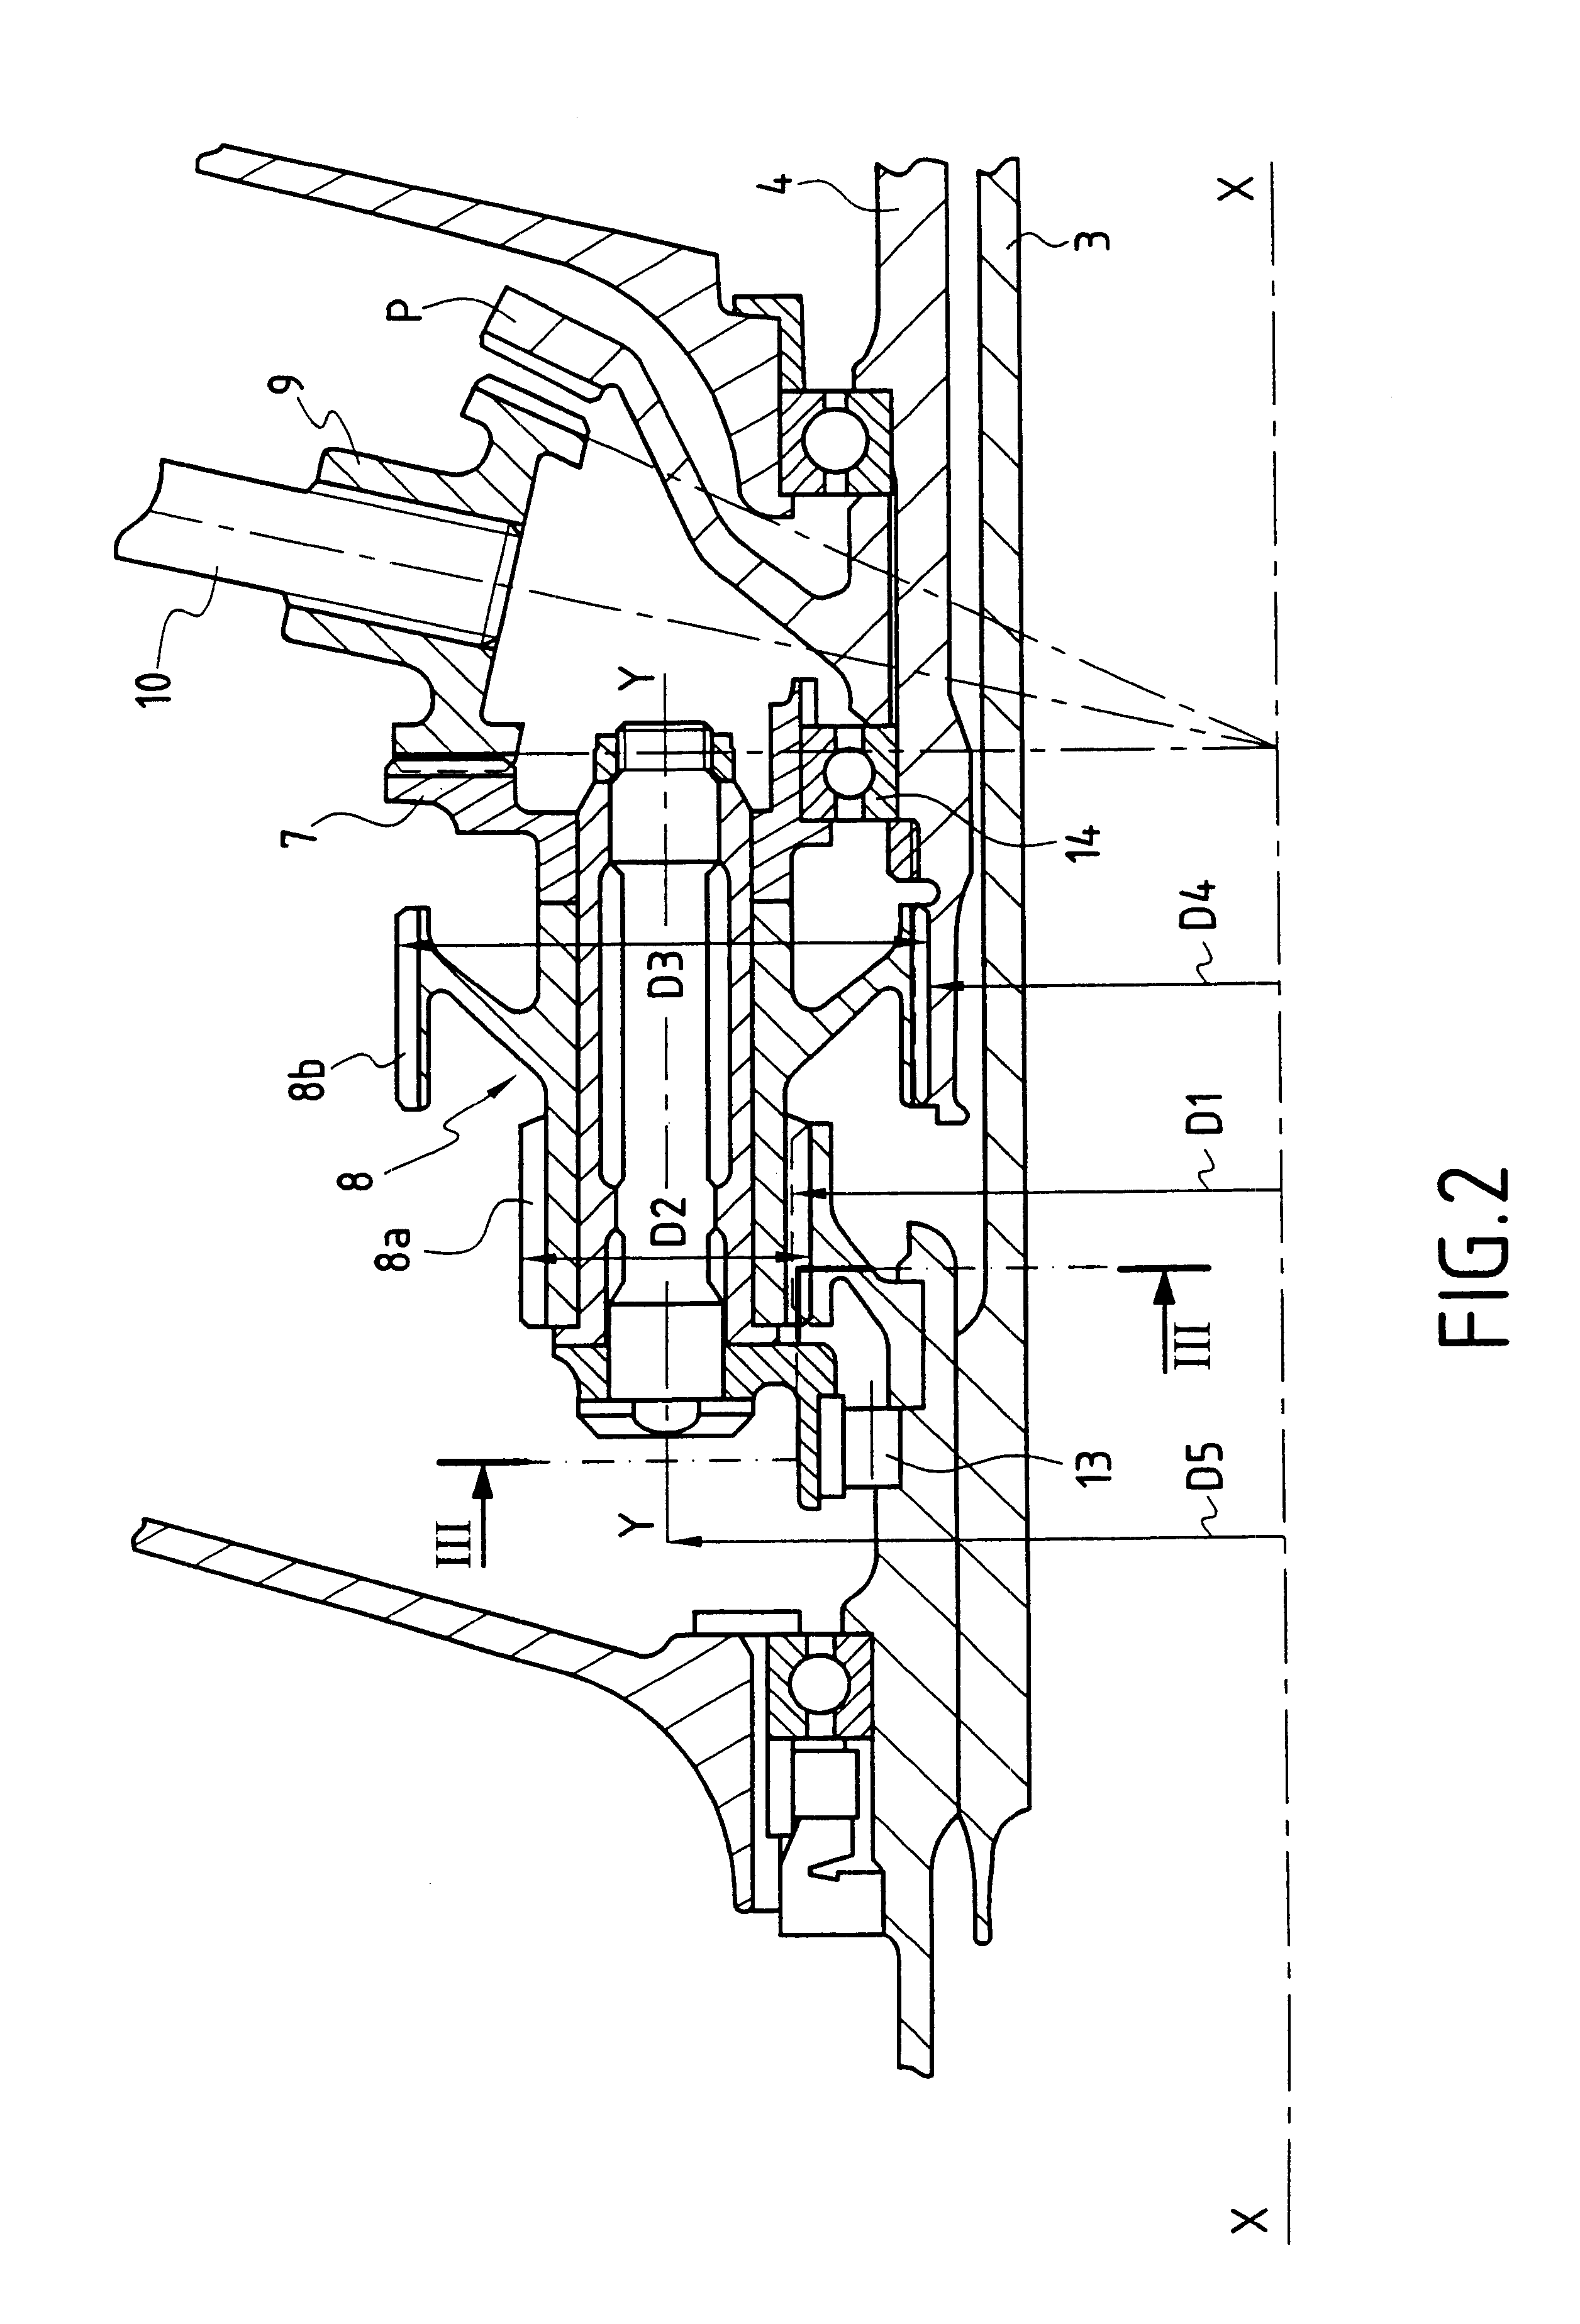 Emergency device for relighting a windmilling turbojet